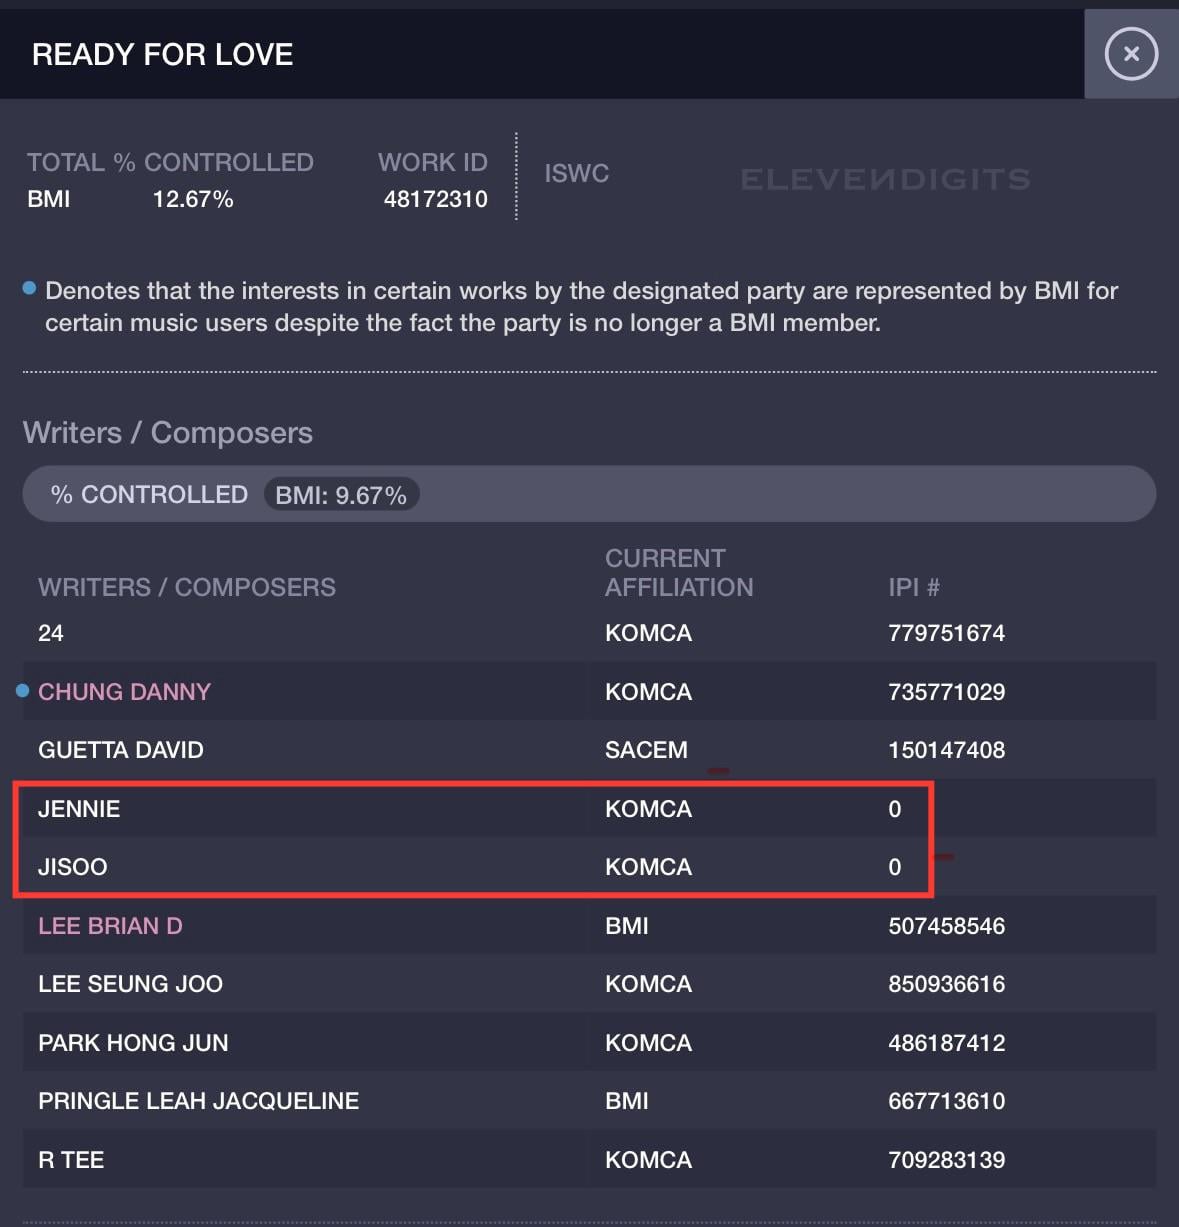 240201 Jisoo & Jennie have been credited as Writers/Composers for BLACKPINK’s ‘Ready for Love’ in BMI!